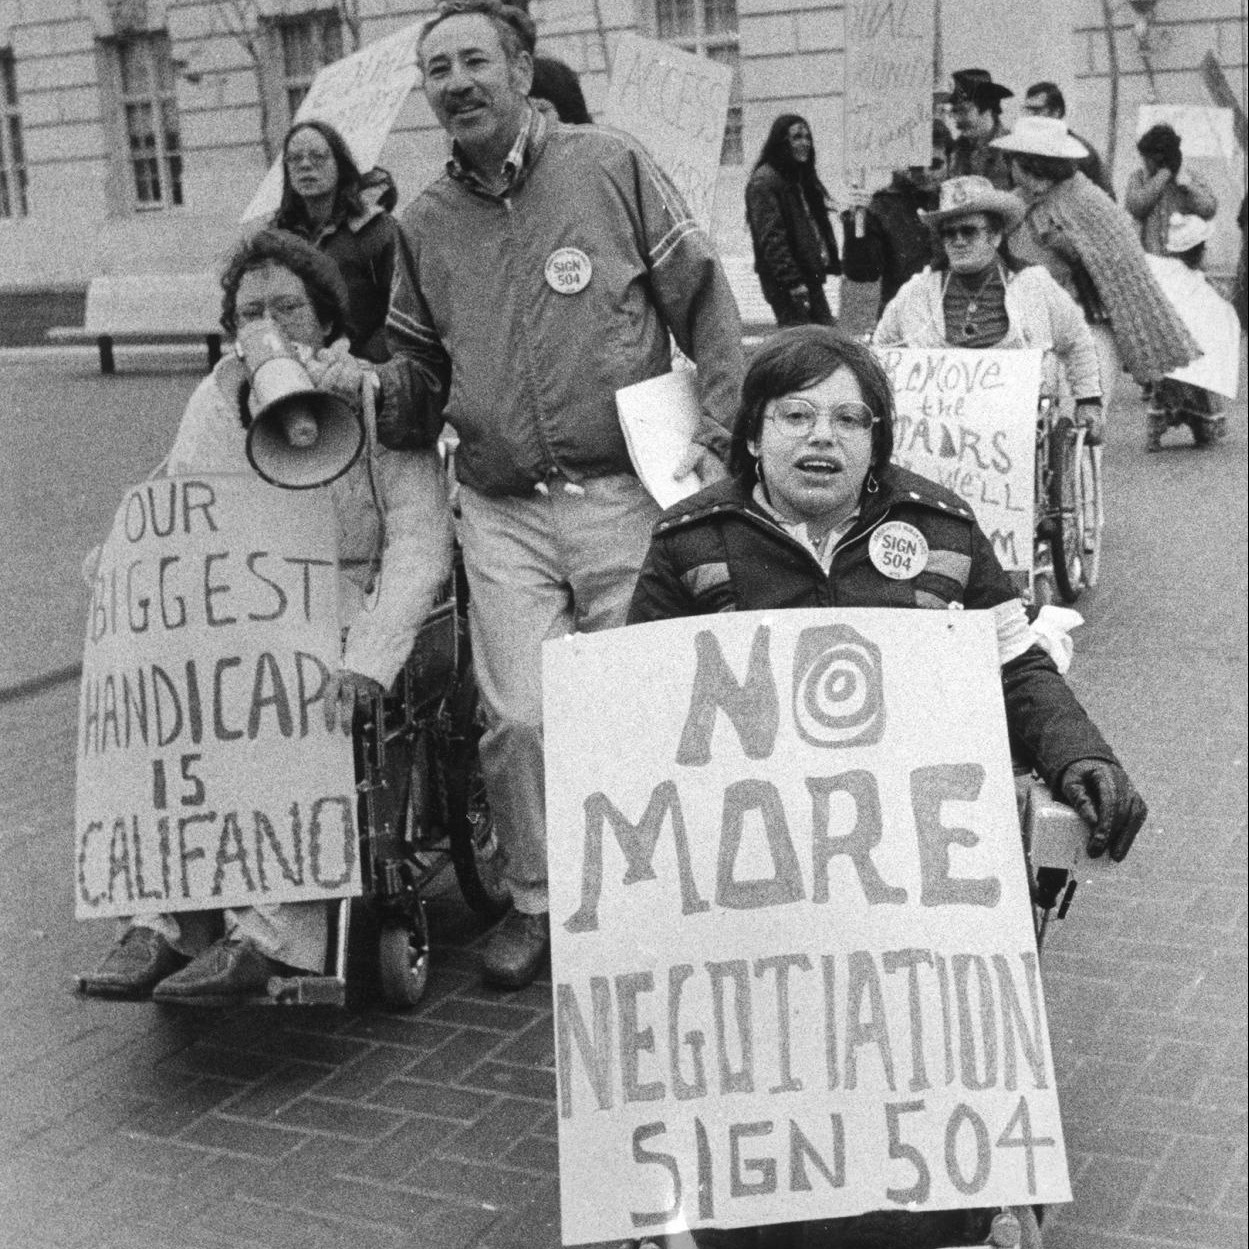 A black-and-white picture of Judith Heumann at a protest holding a sign that reads, "No more negotiations, sign 504." Other people attending the protest are behind Heumann in the background. One protester holds a sign that says "Our biggest handicap is Califano," while a man holds a megaphone up for them to speak.